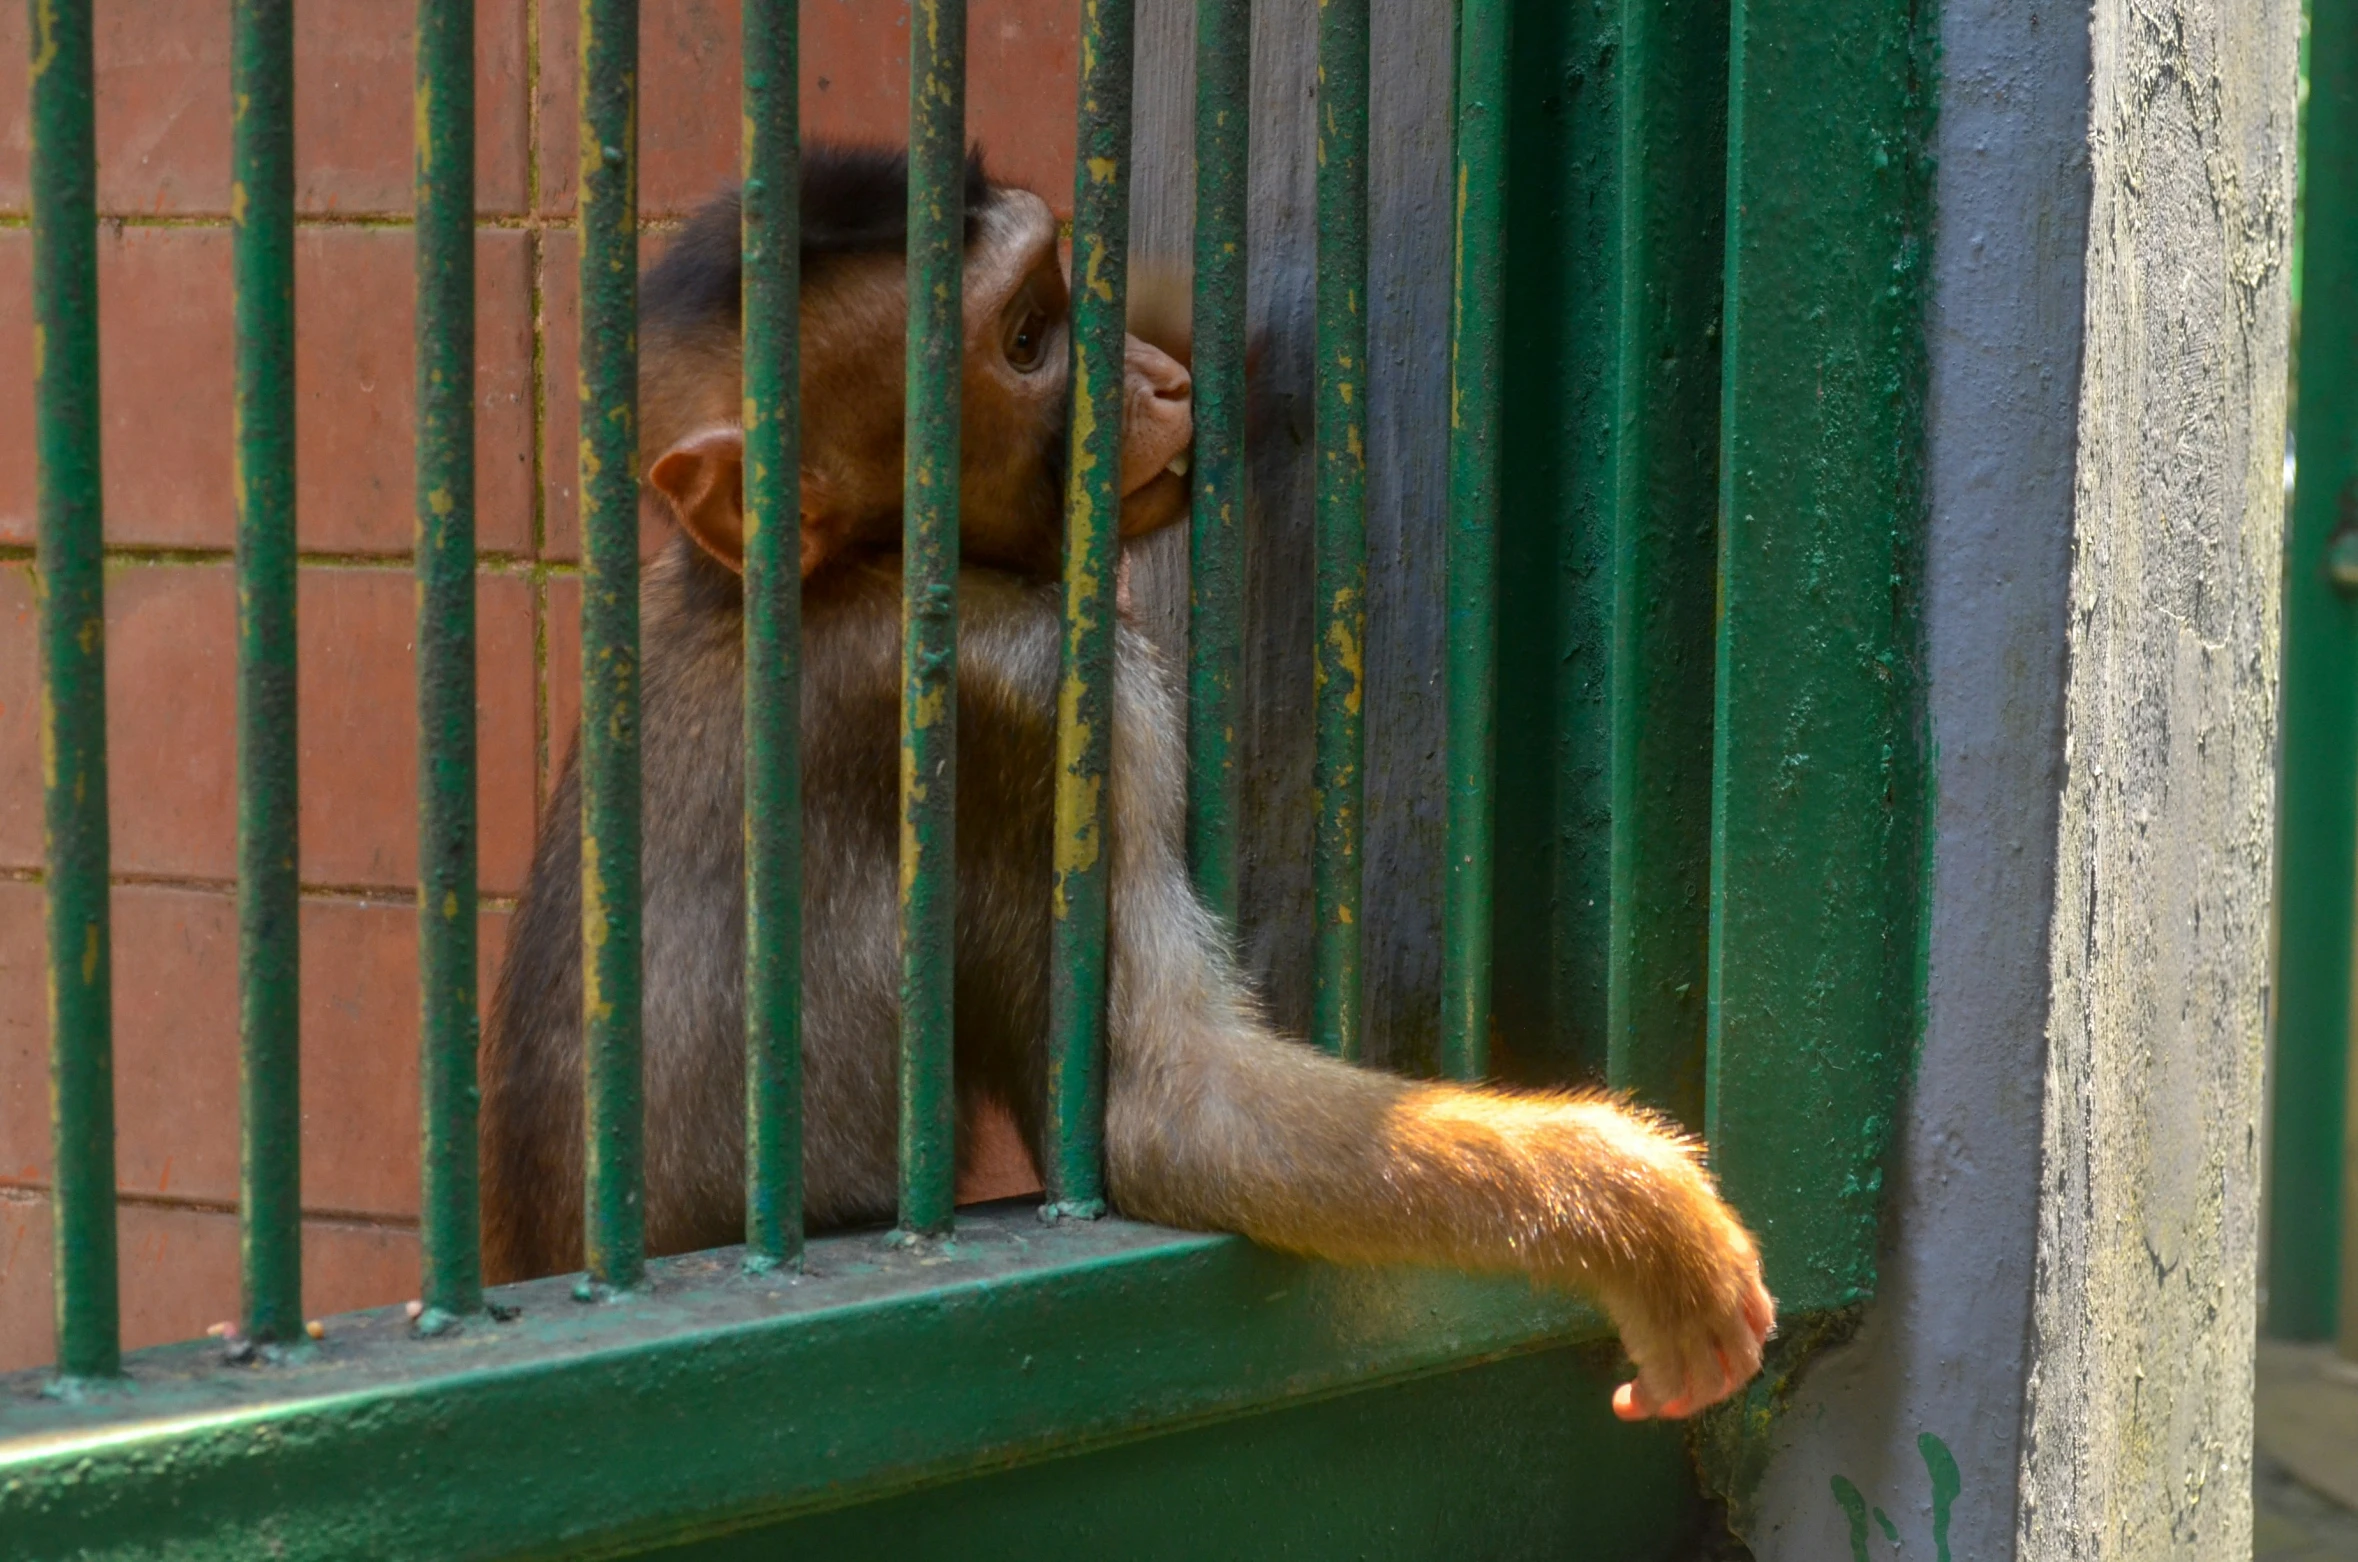 a monkey in a cage looks at another animal through the bars